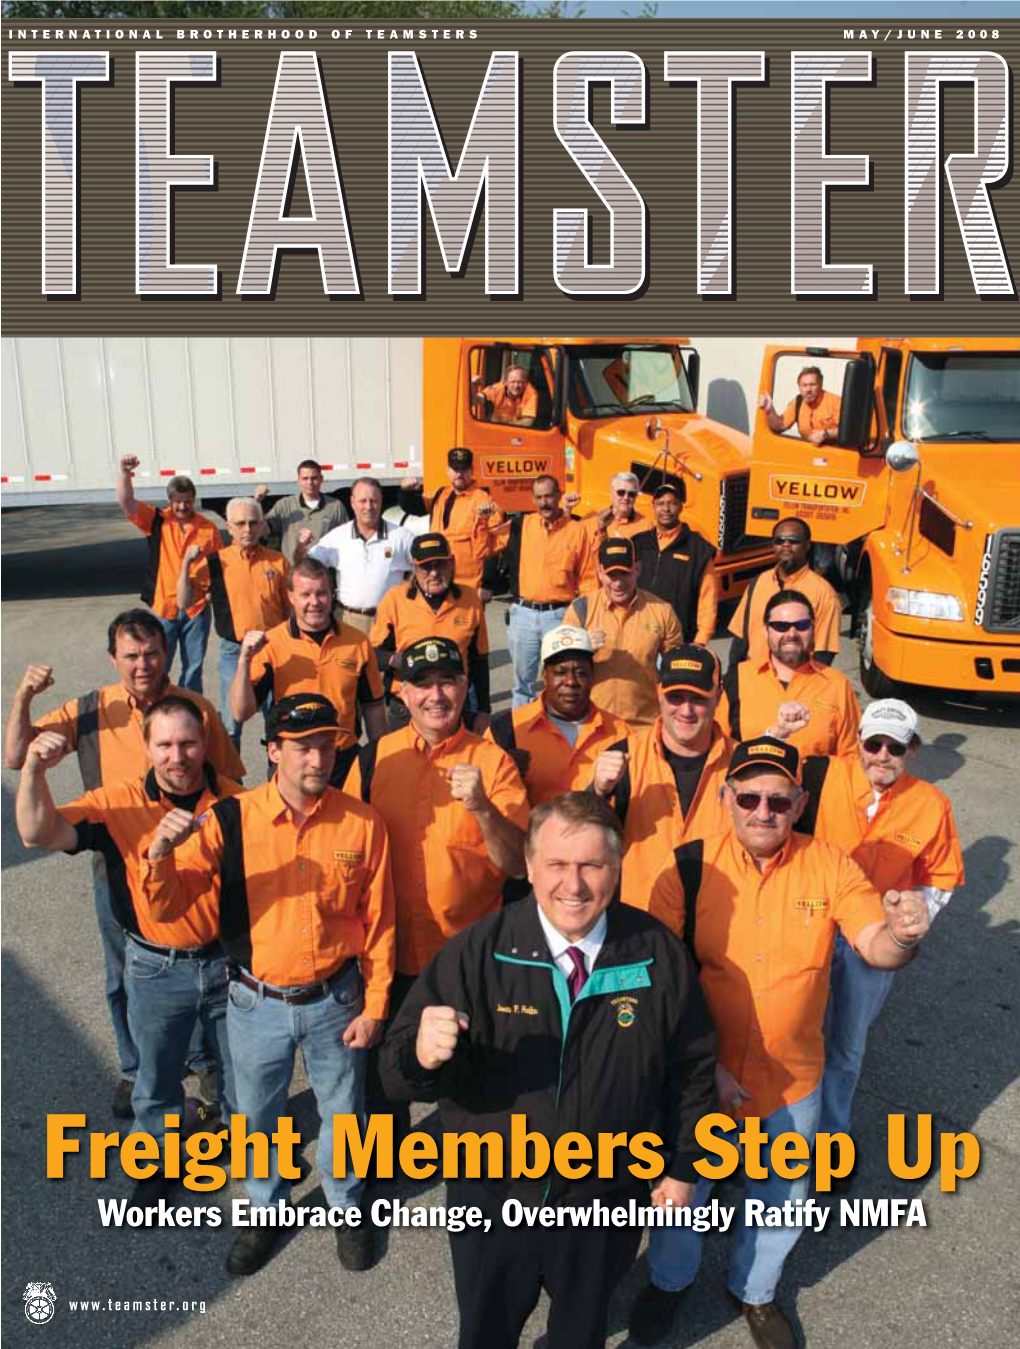 Freight Members Step up Workers Embrace Change, Overwhelmingly Ratify NMFA